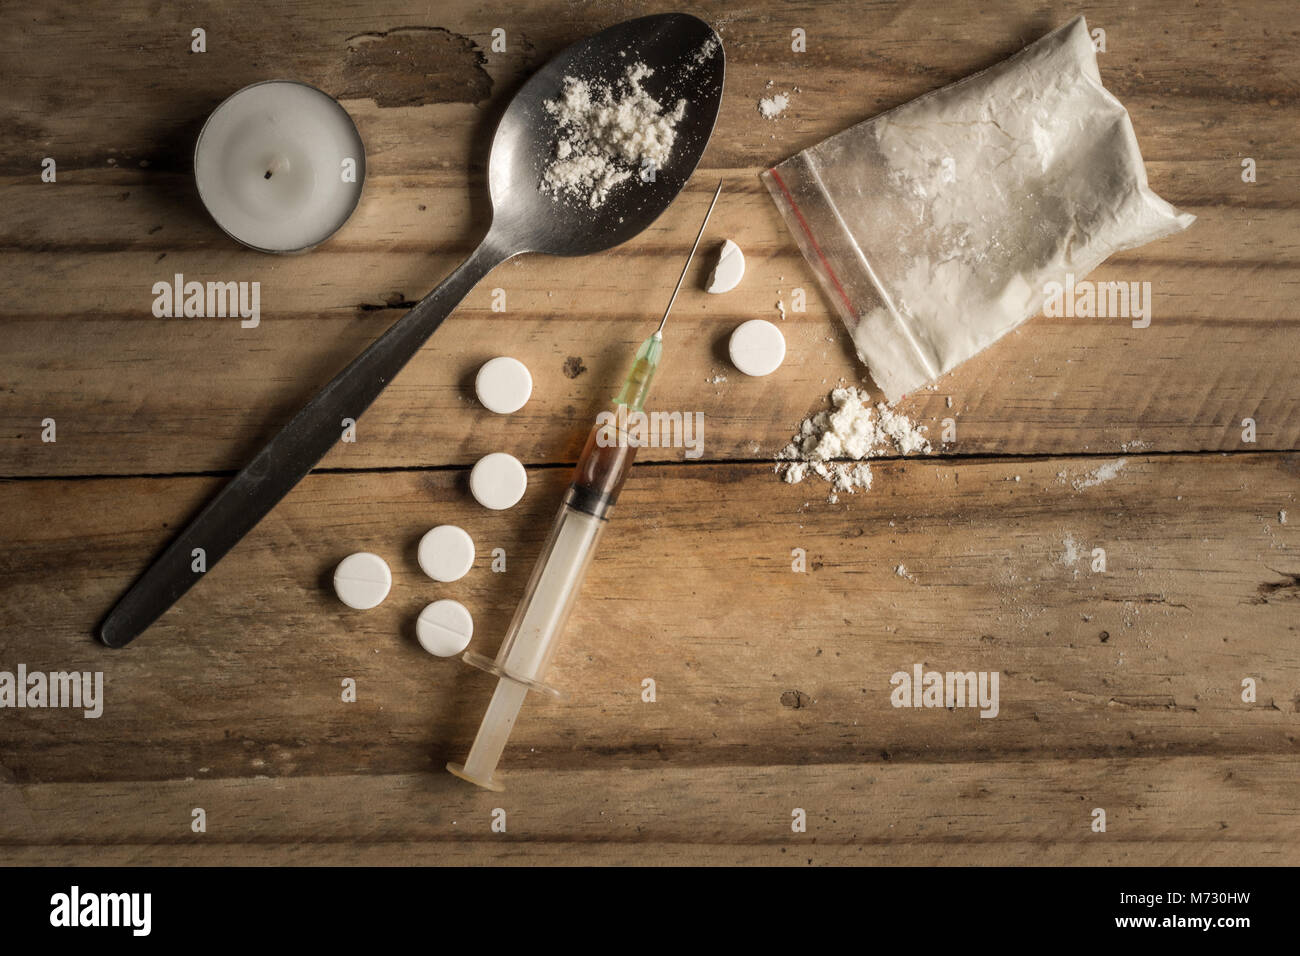 Drugs, powder, spoon, and tablets on rustic wooden background. Drug addiction concept background with space for text Stock Photo